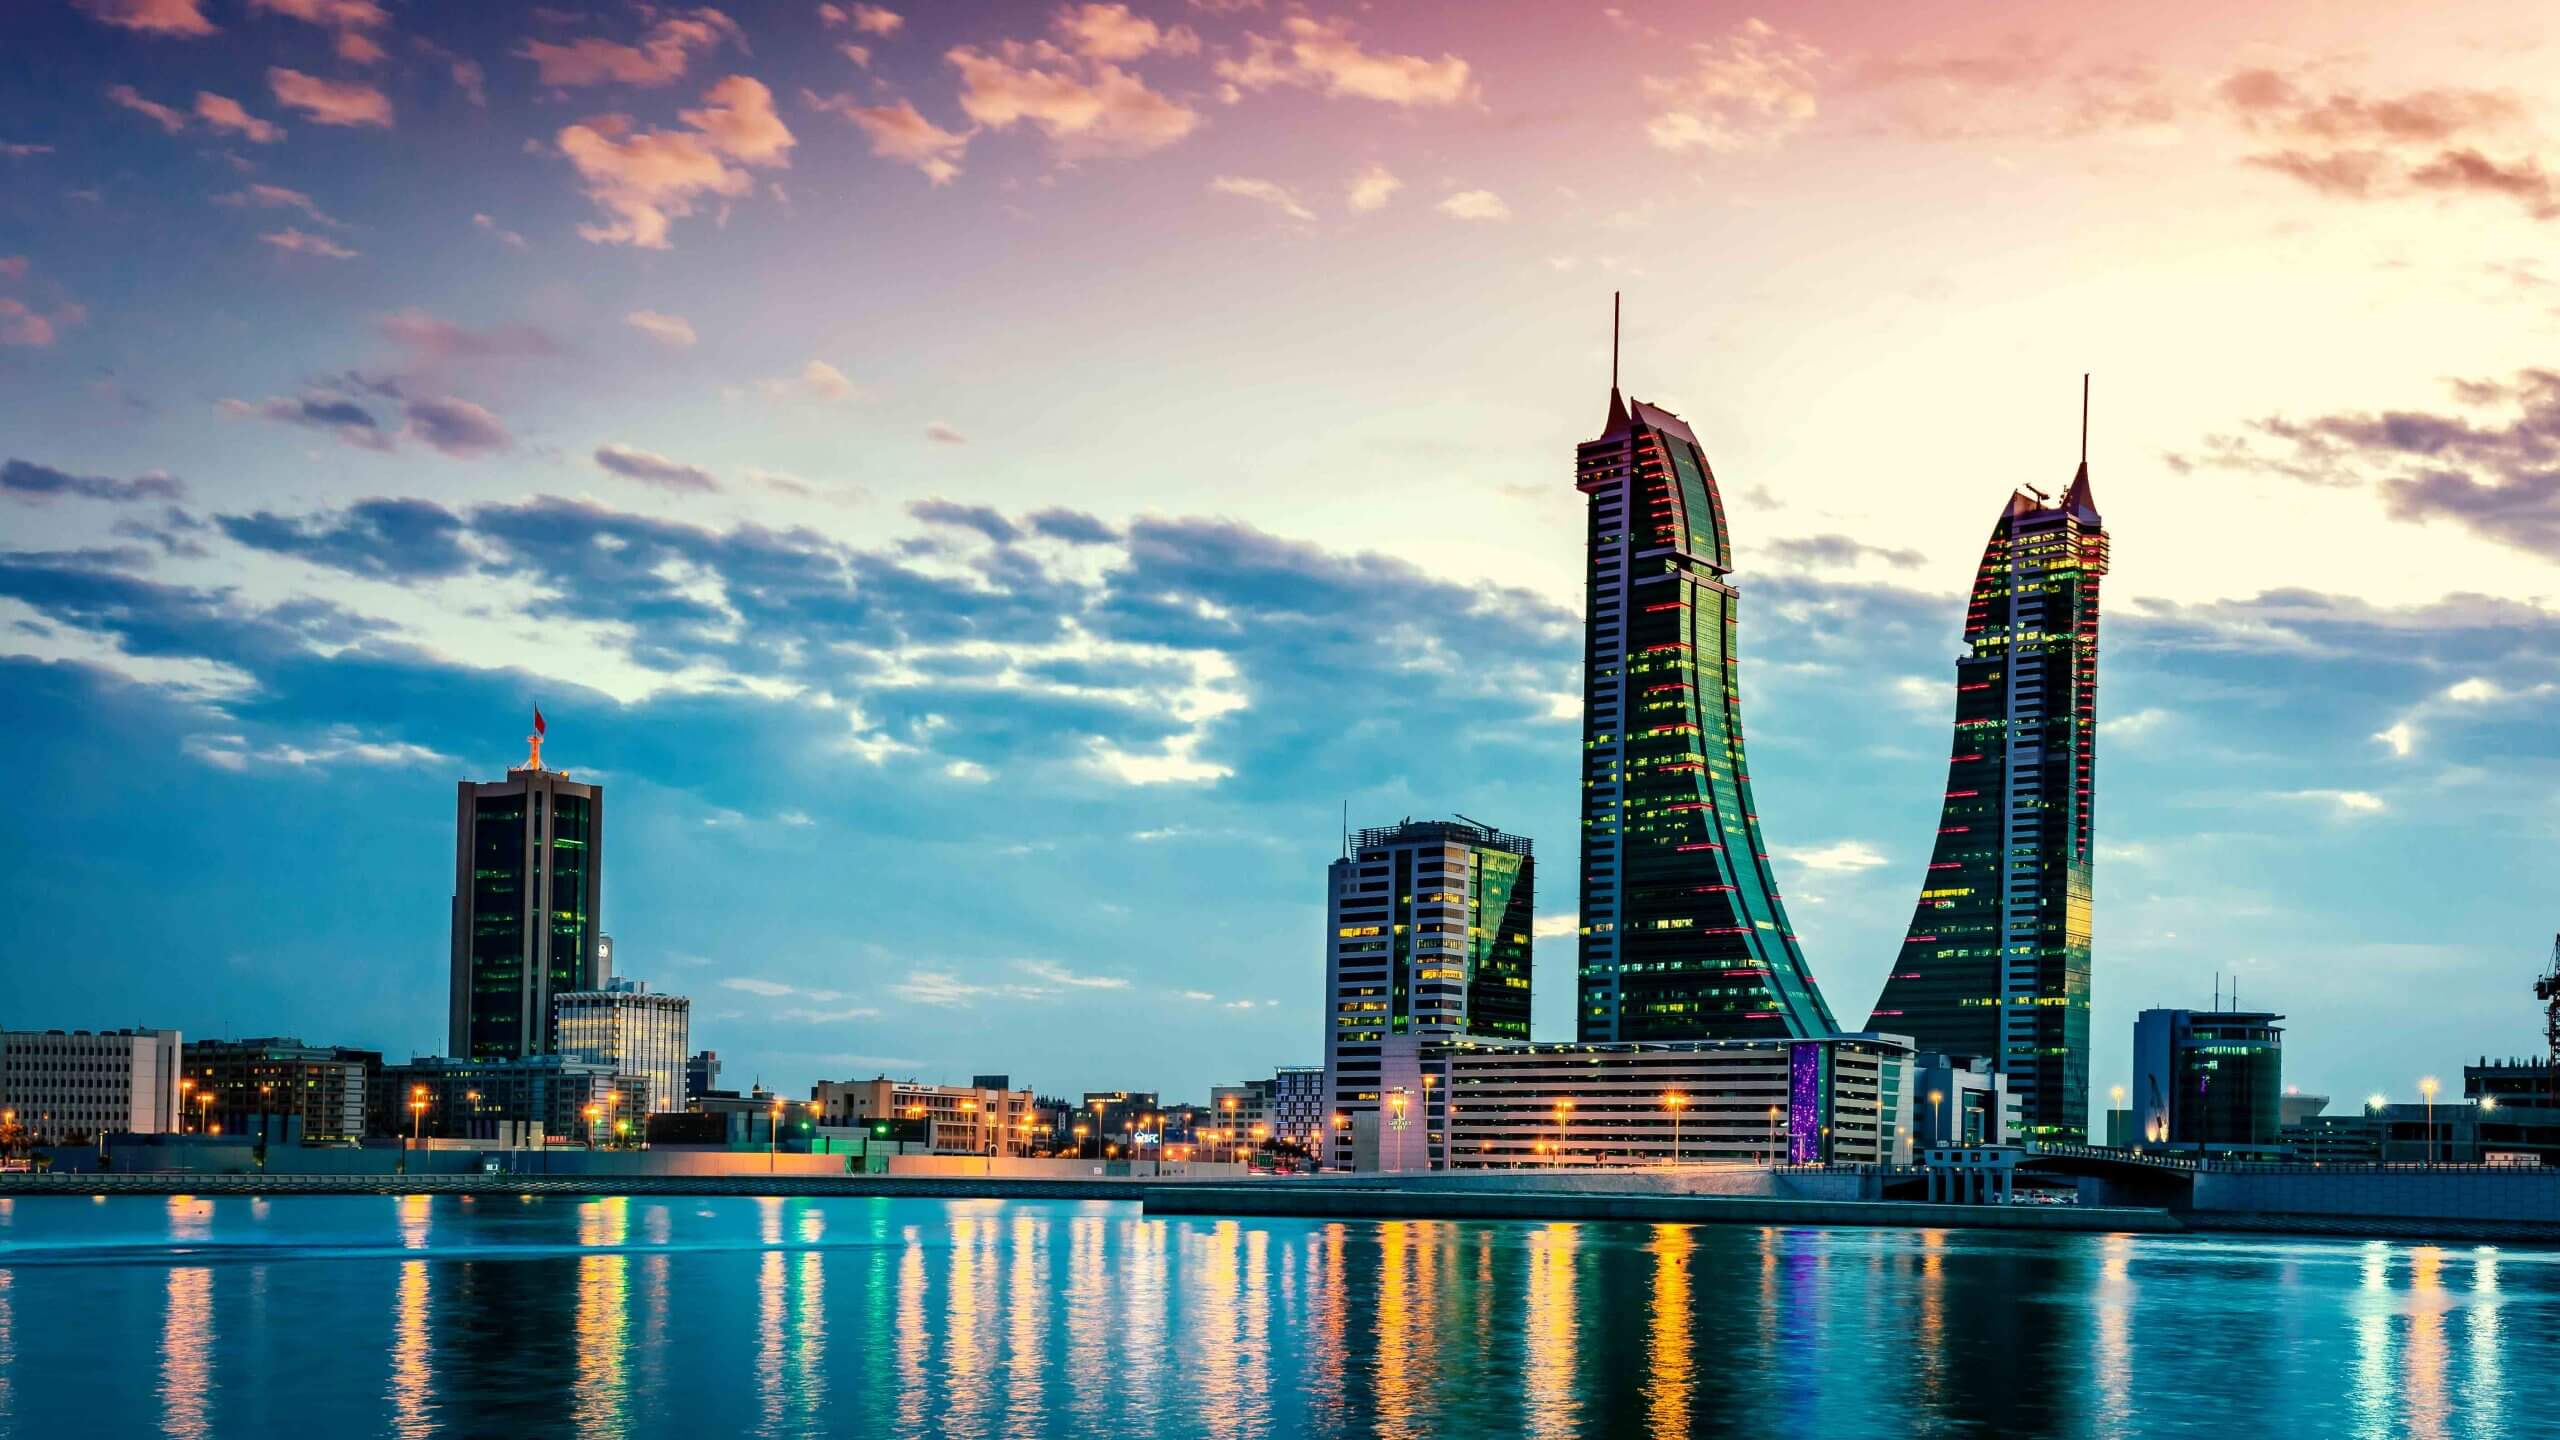 FDI inflows to Bahrain increase by 73% in 2021, surpassing global average